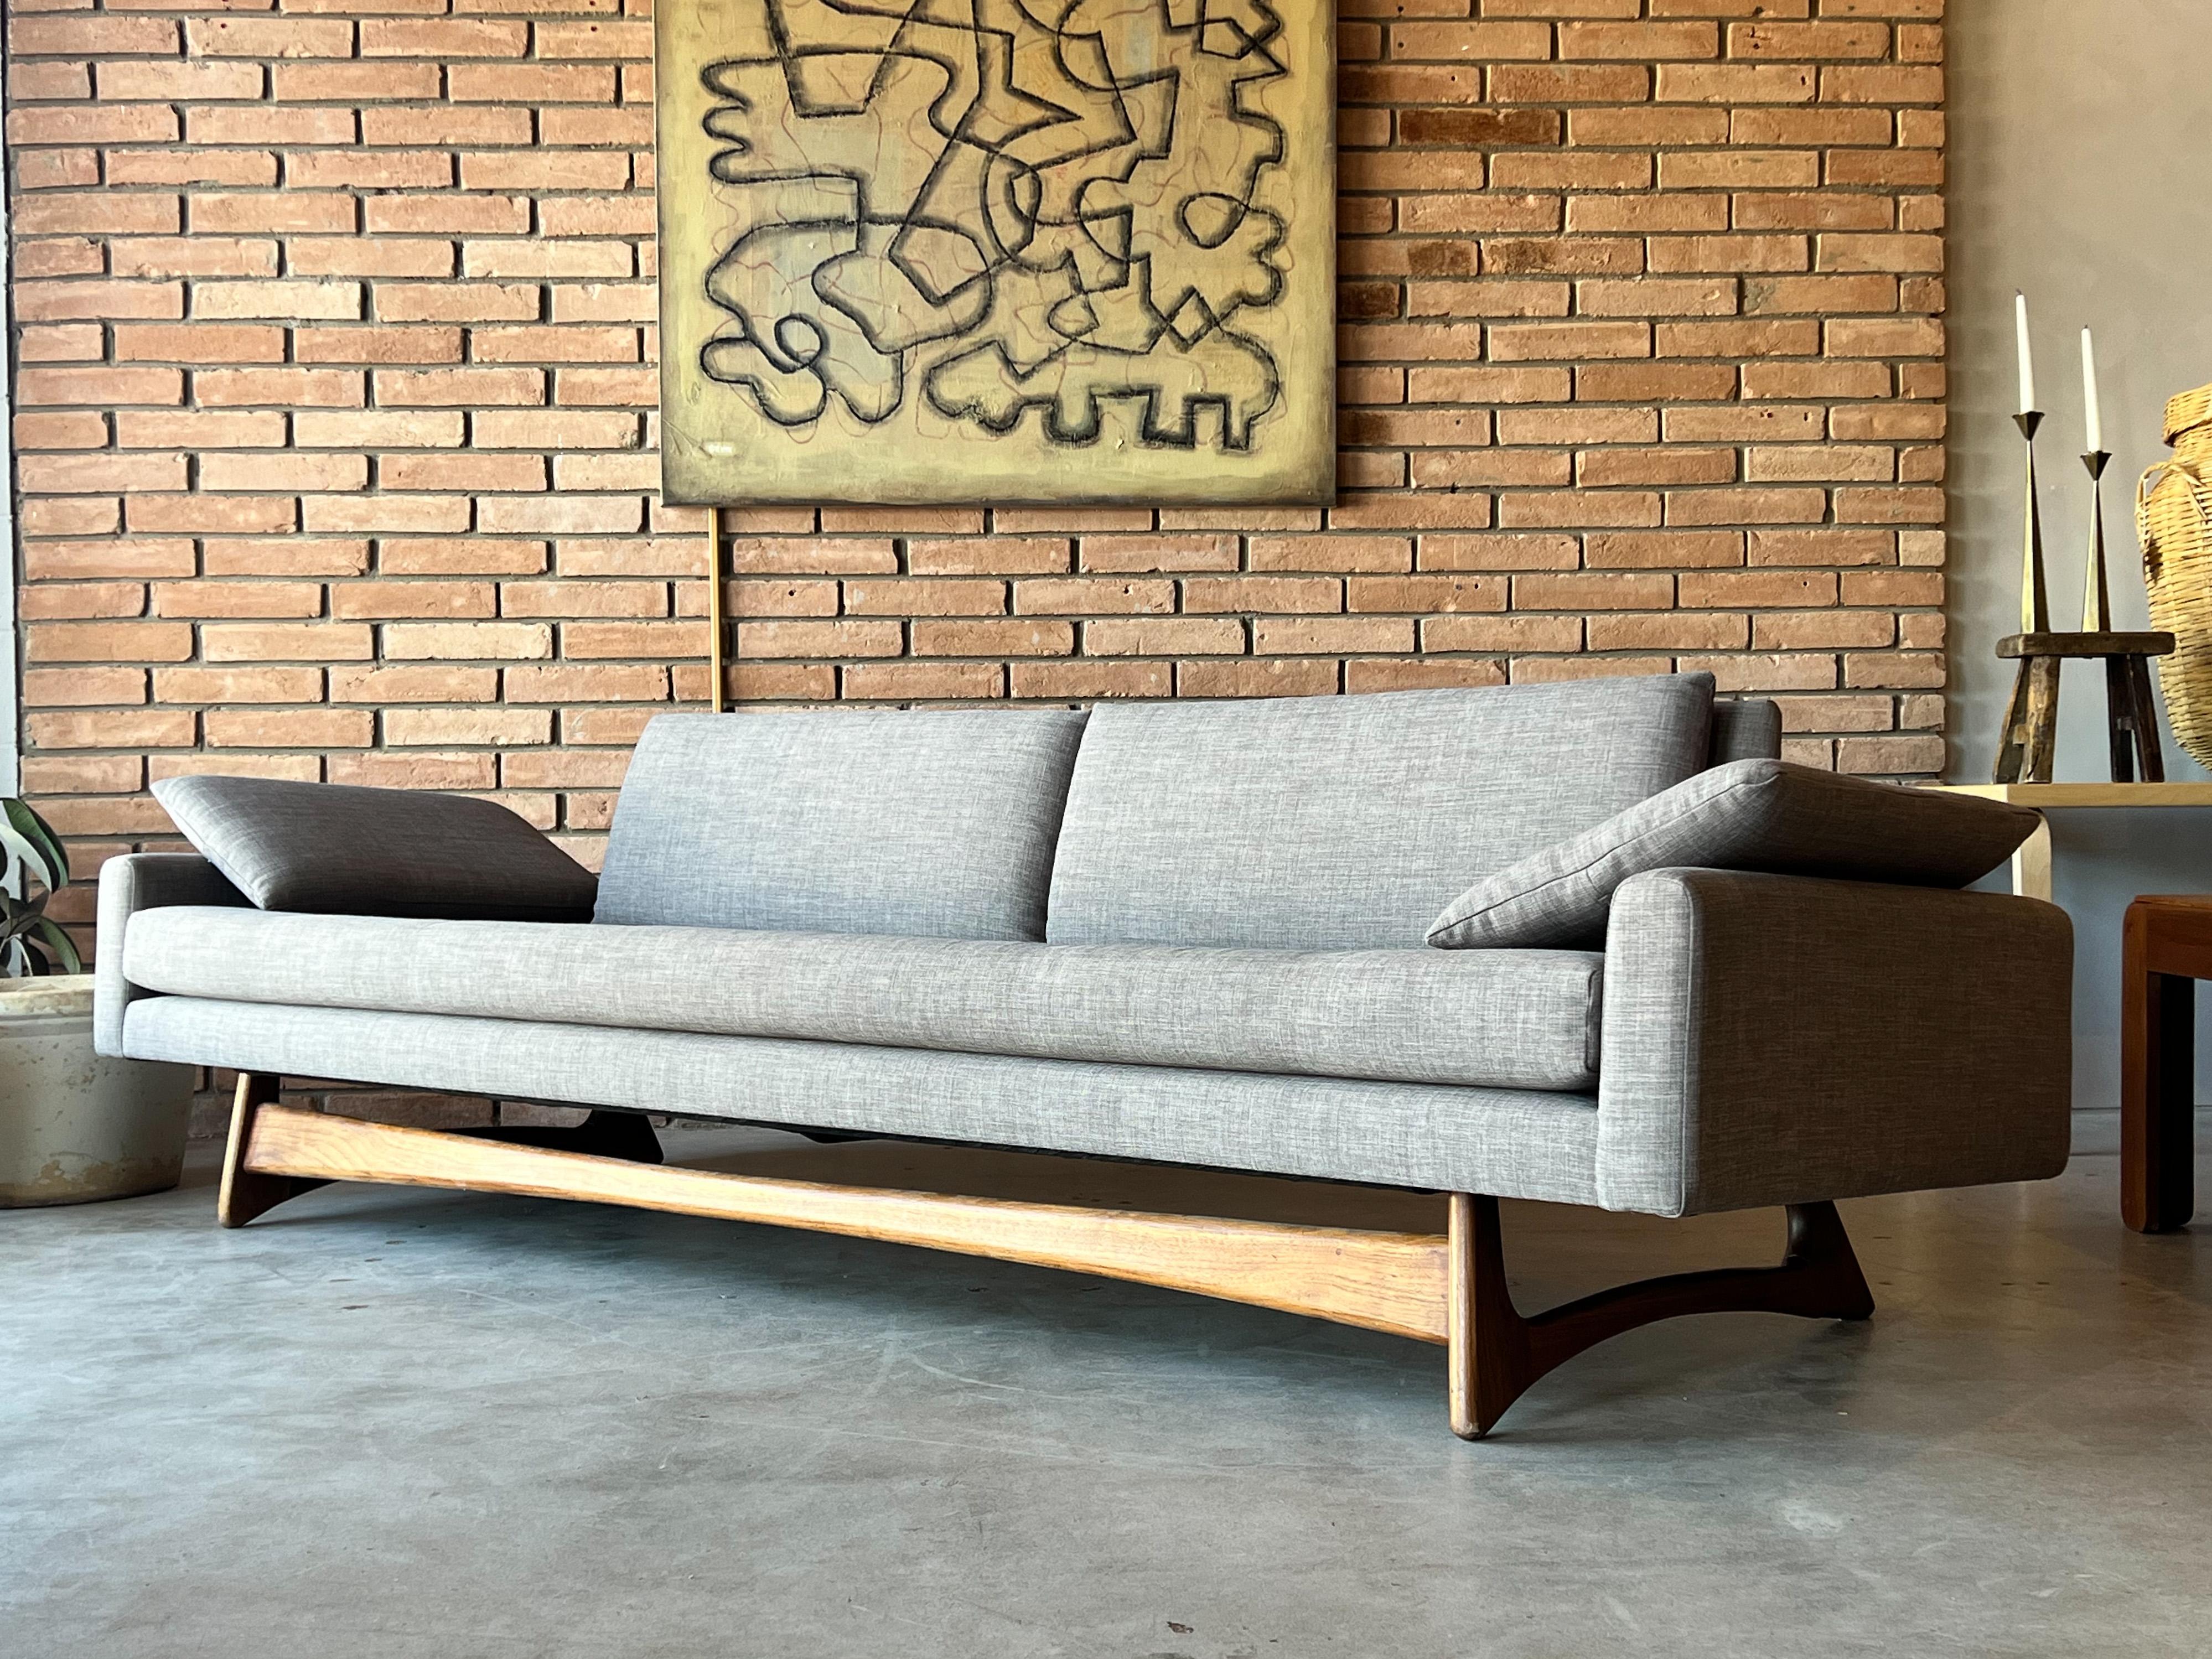 Beautiful sofa designed by Adrian Pearsall for Craft Associates, c. 1960s. Model 2408 shows off its sculptural solid walnut base from every angle and is no wonder it’s as iconic as mid-century sofas get. It is often imitated. Not only is this sofa